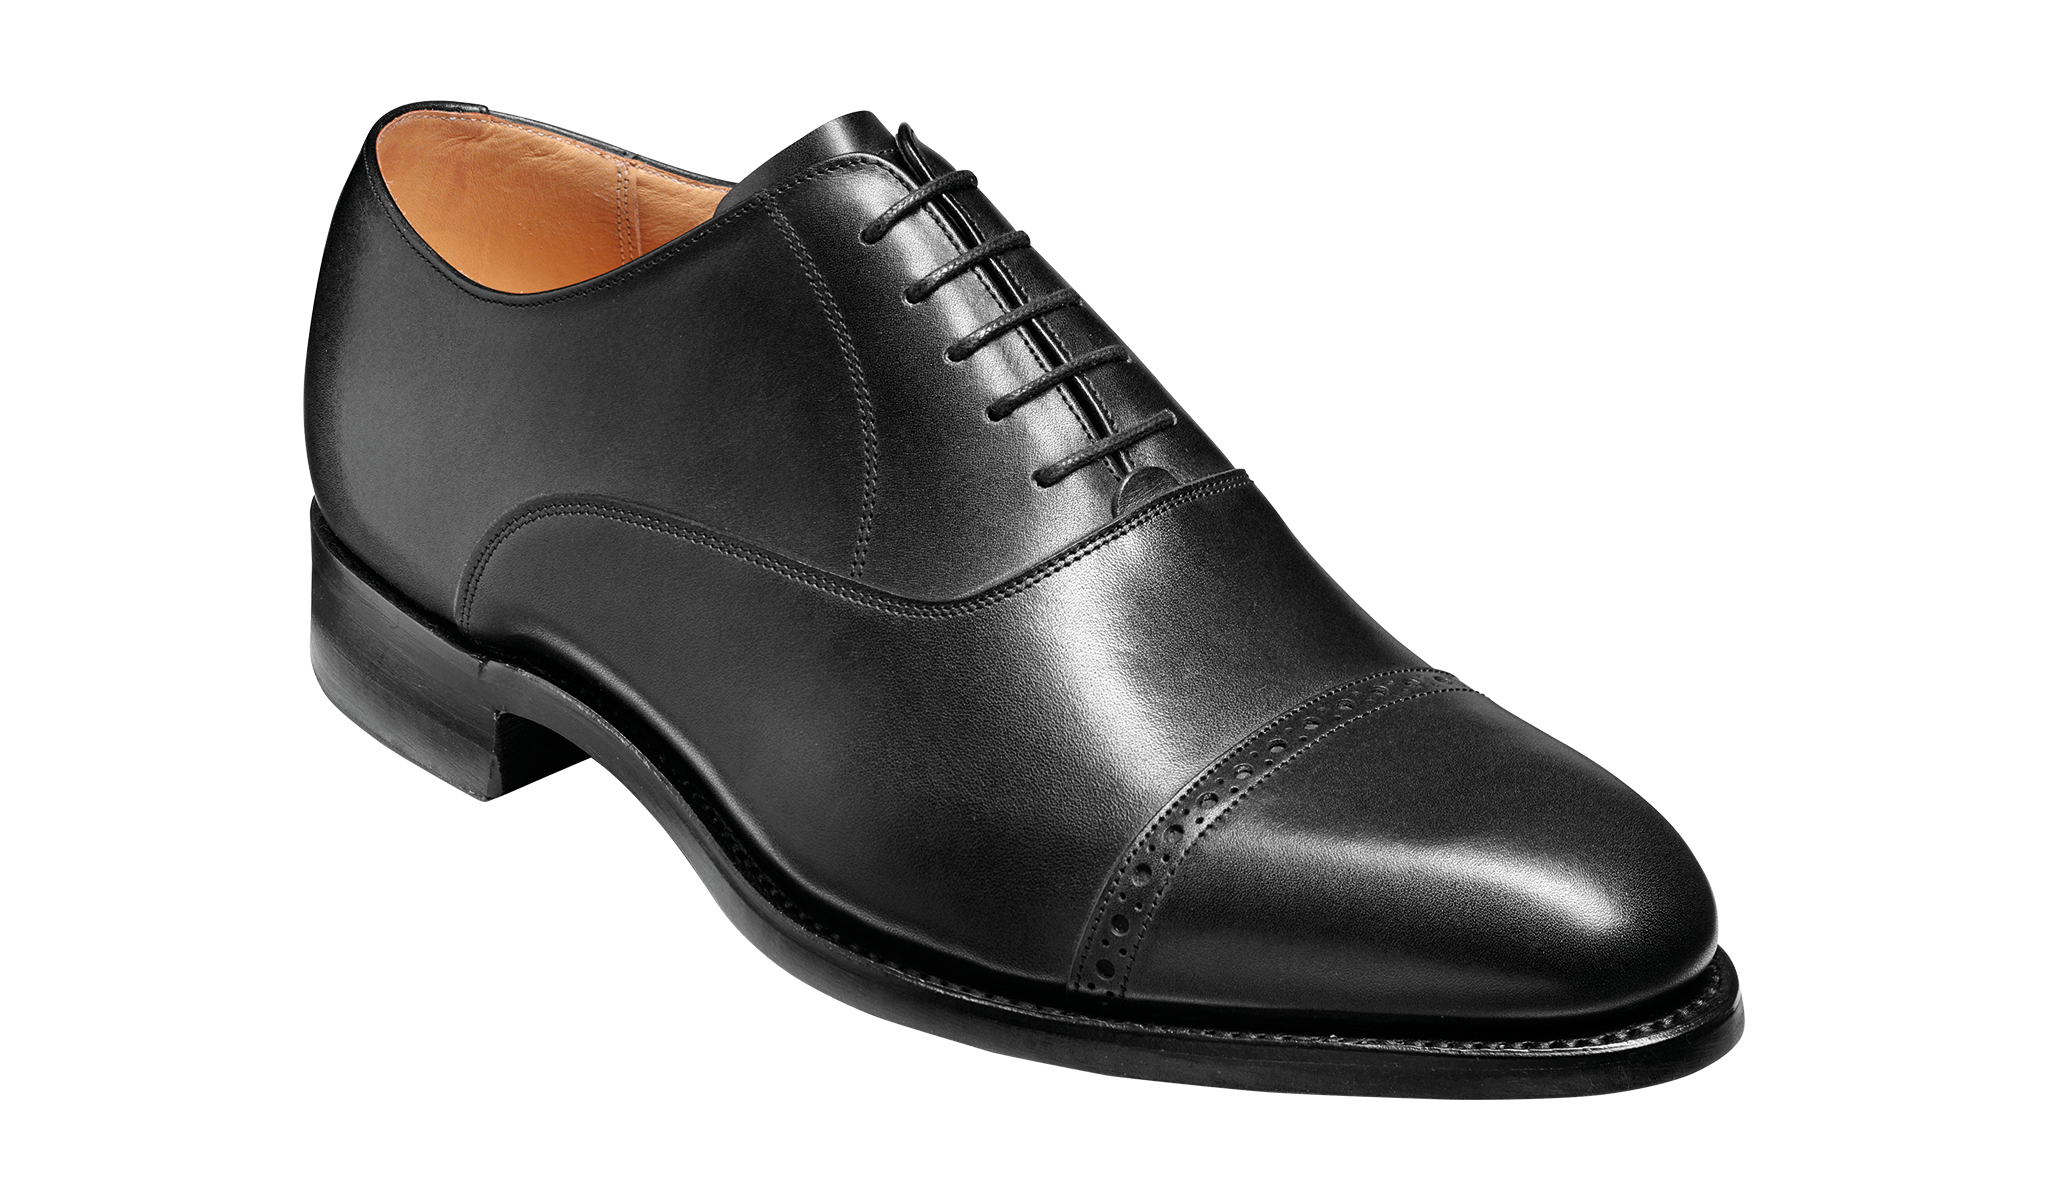 Burford - A premium black calf leather oxford shoe from Barker.